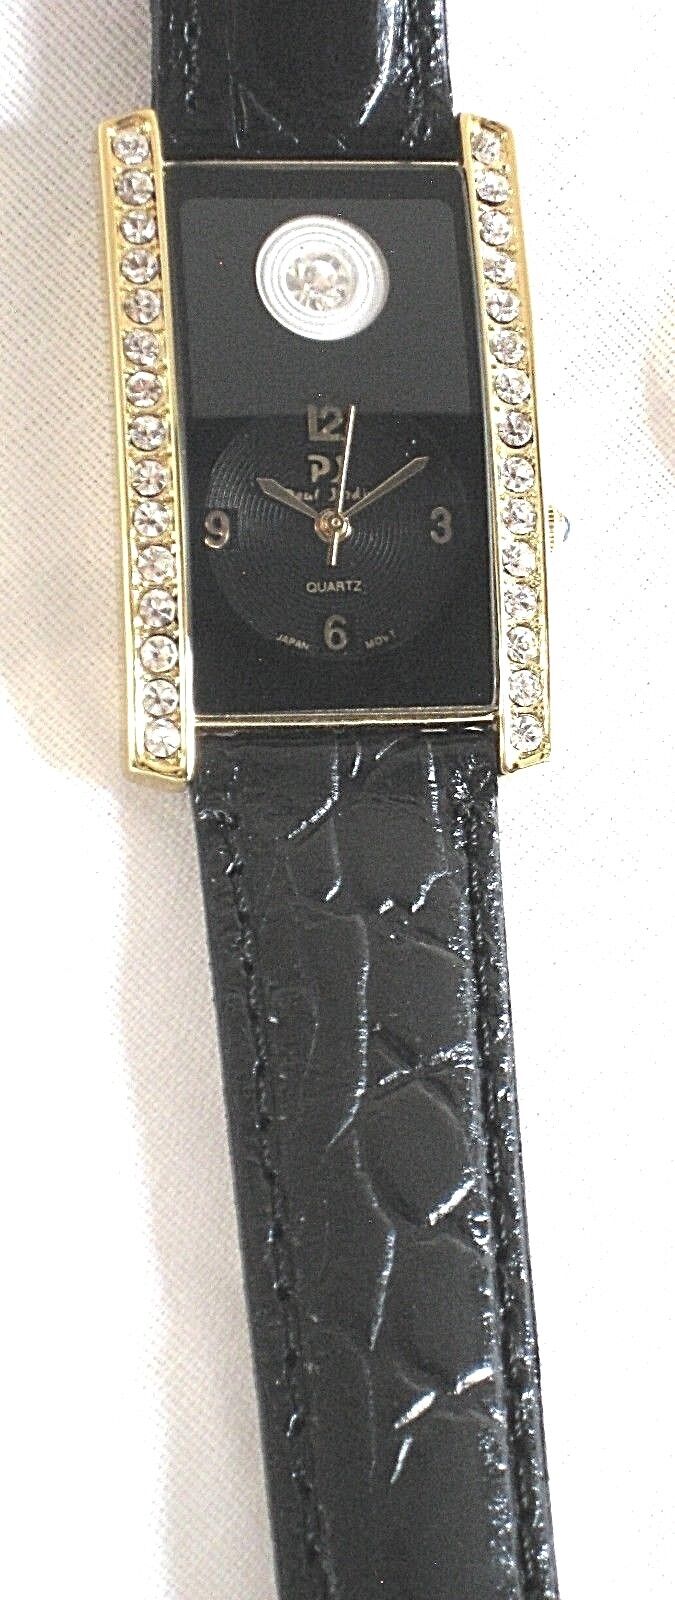 CRYSTAL RHINESTONE RECTANGLE GOLDTONE WATCH*BLACK LEATHER BAND*WATER RESISTANT